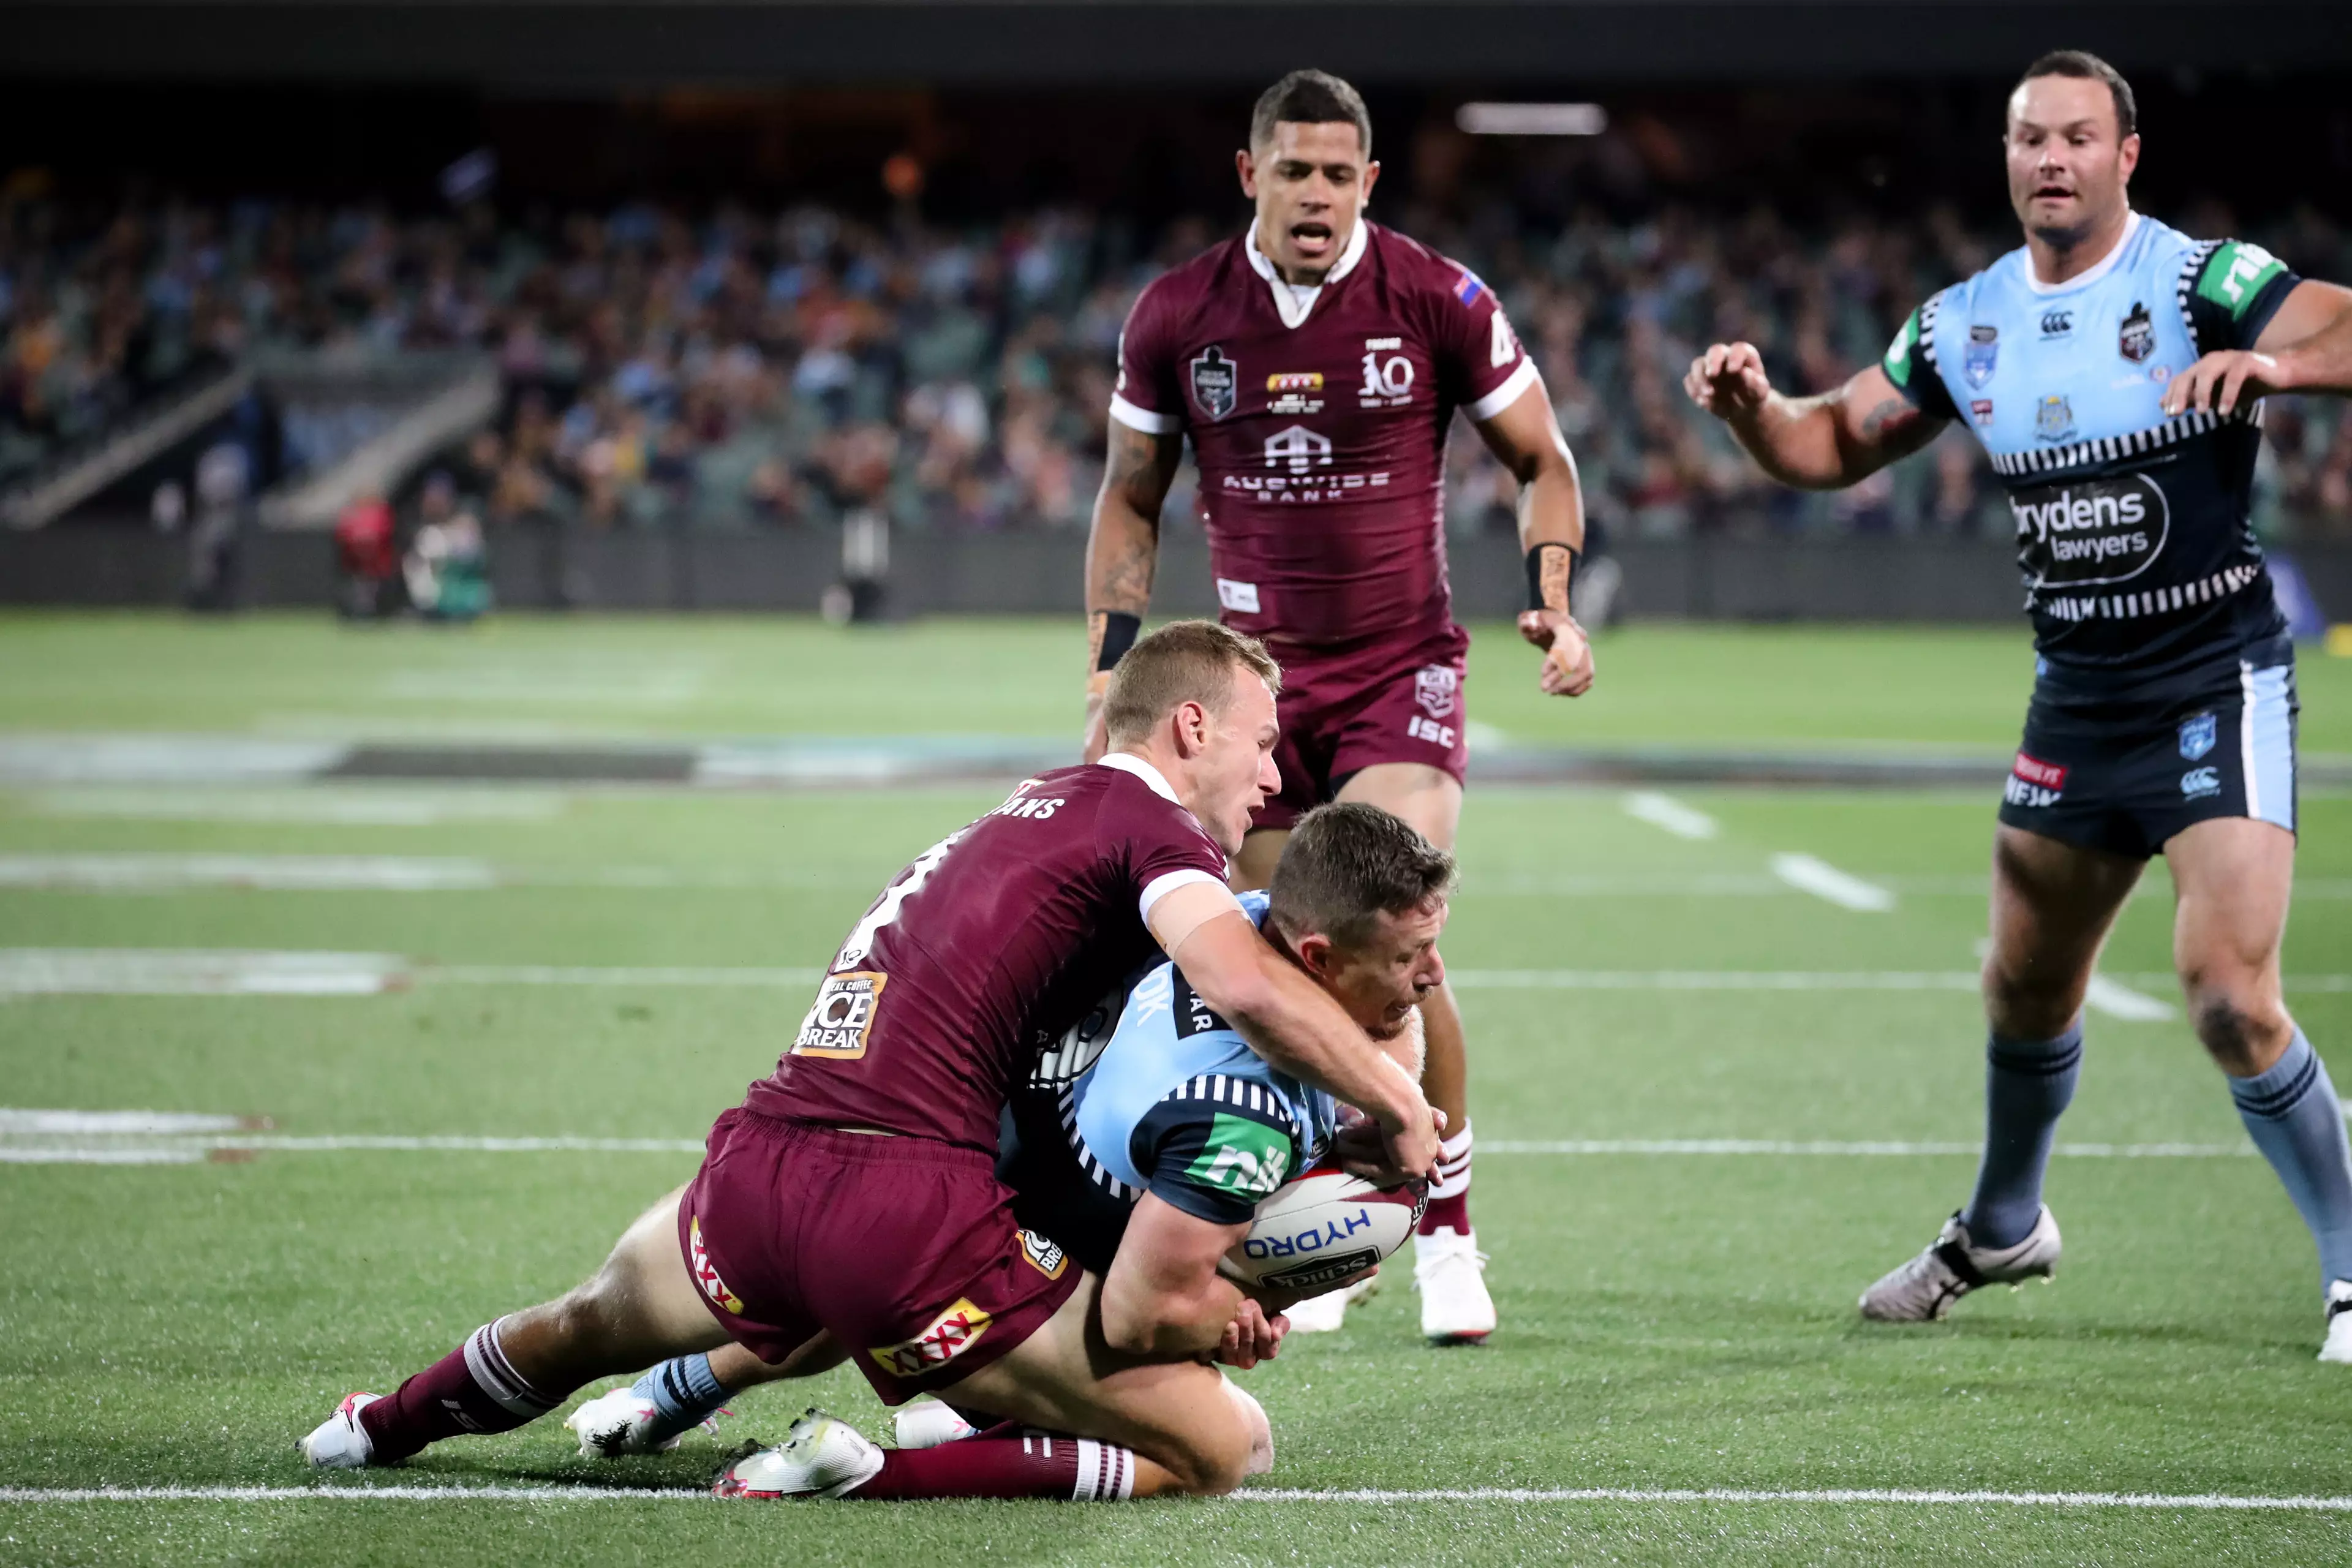 Cook scores past Gagai in Game 1 of the 2020 series.